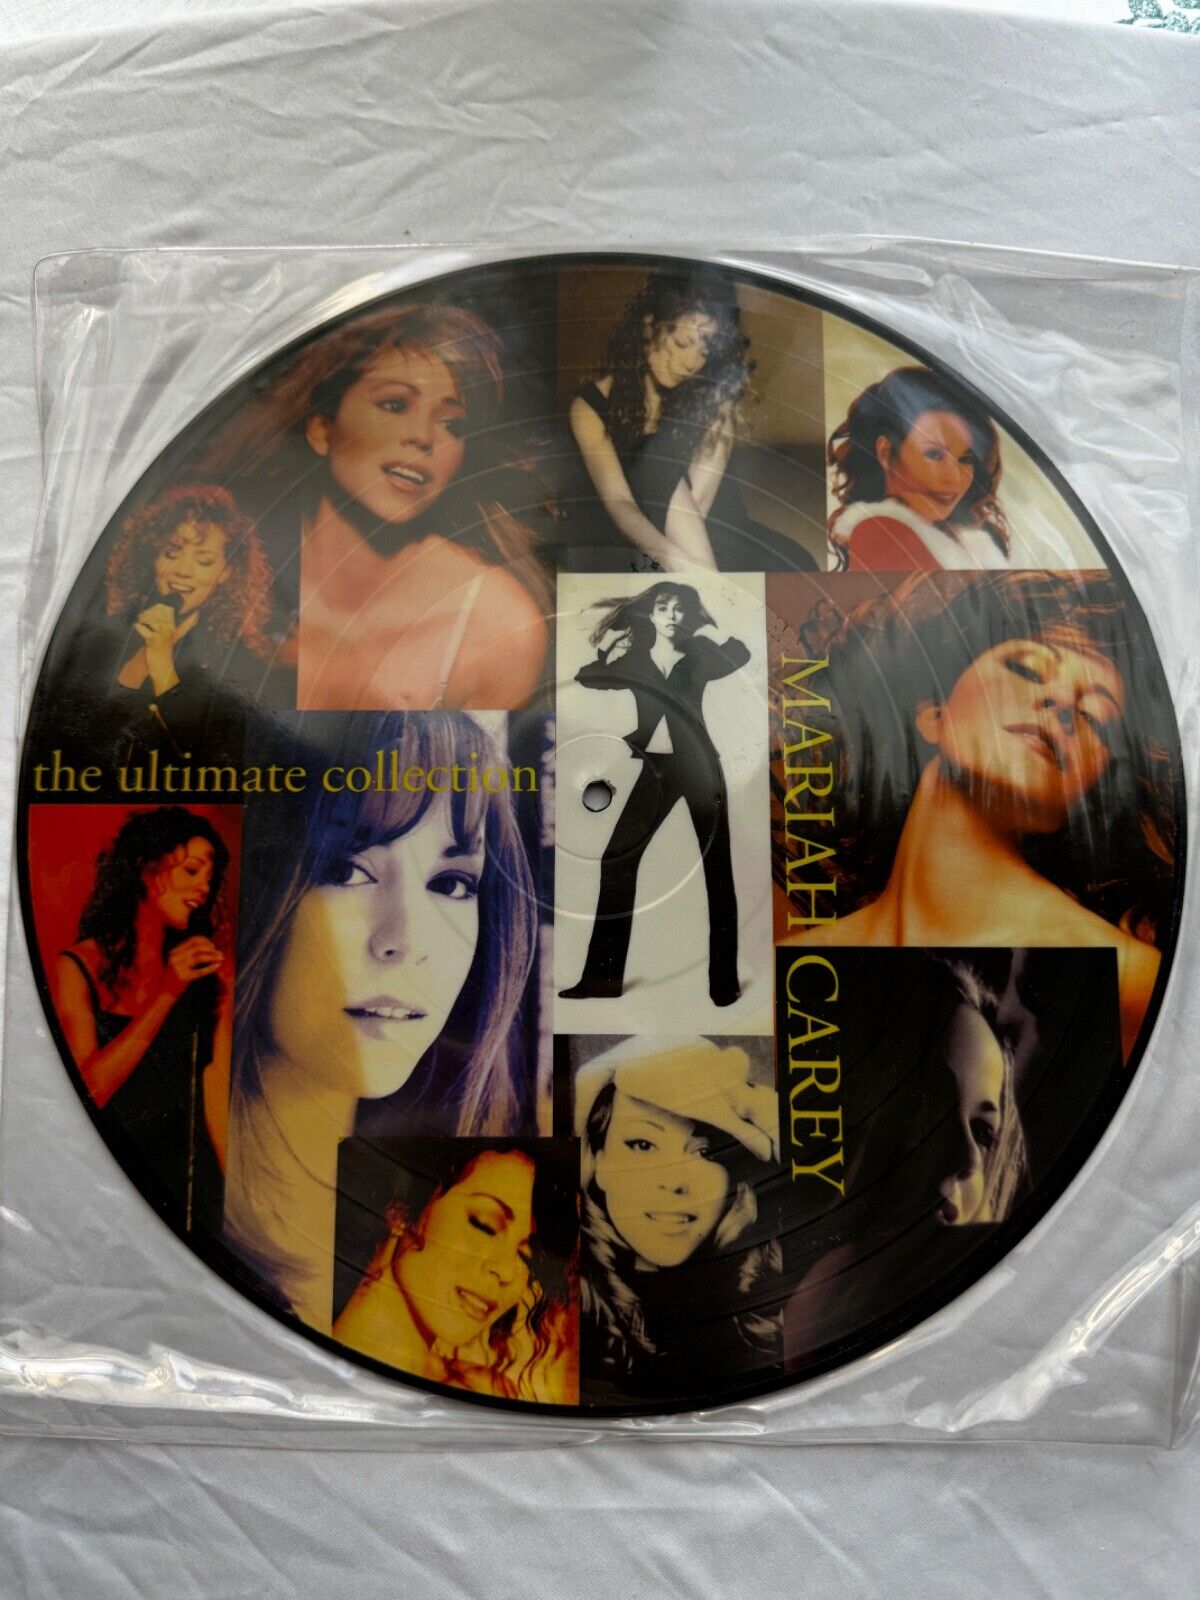 SUPER RARE 1998 Japanese PROMO Picture Disc Mariah Carey The Ultimate Collection